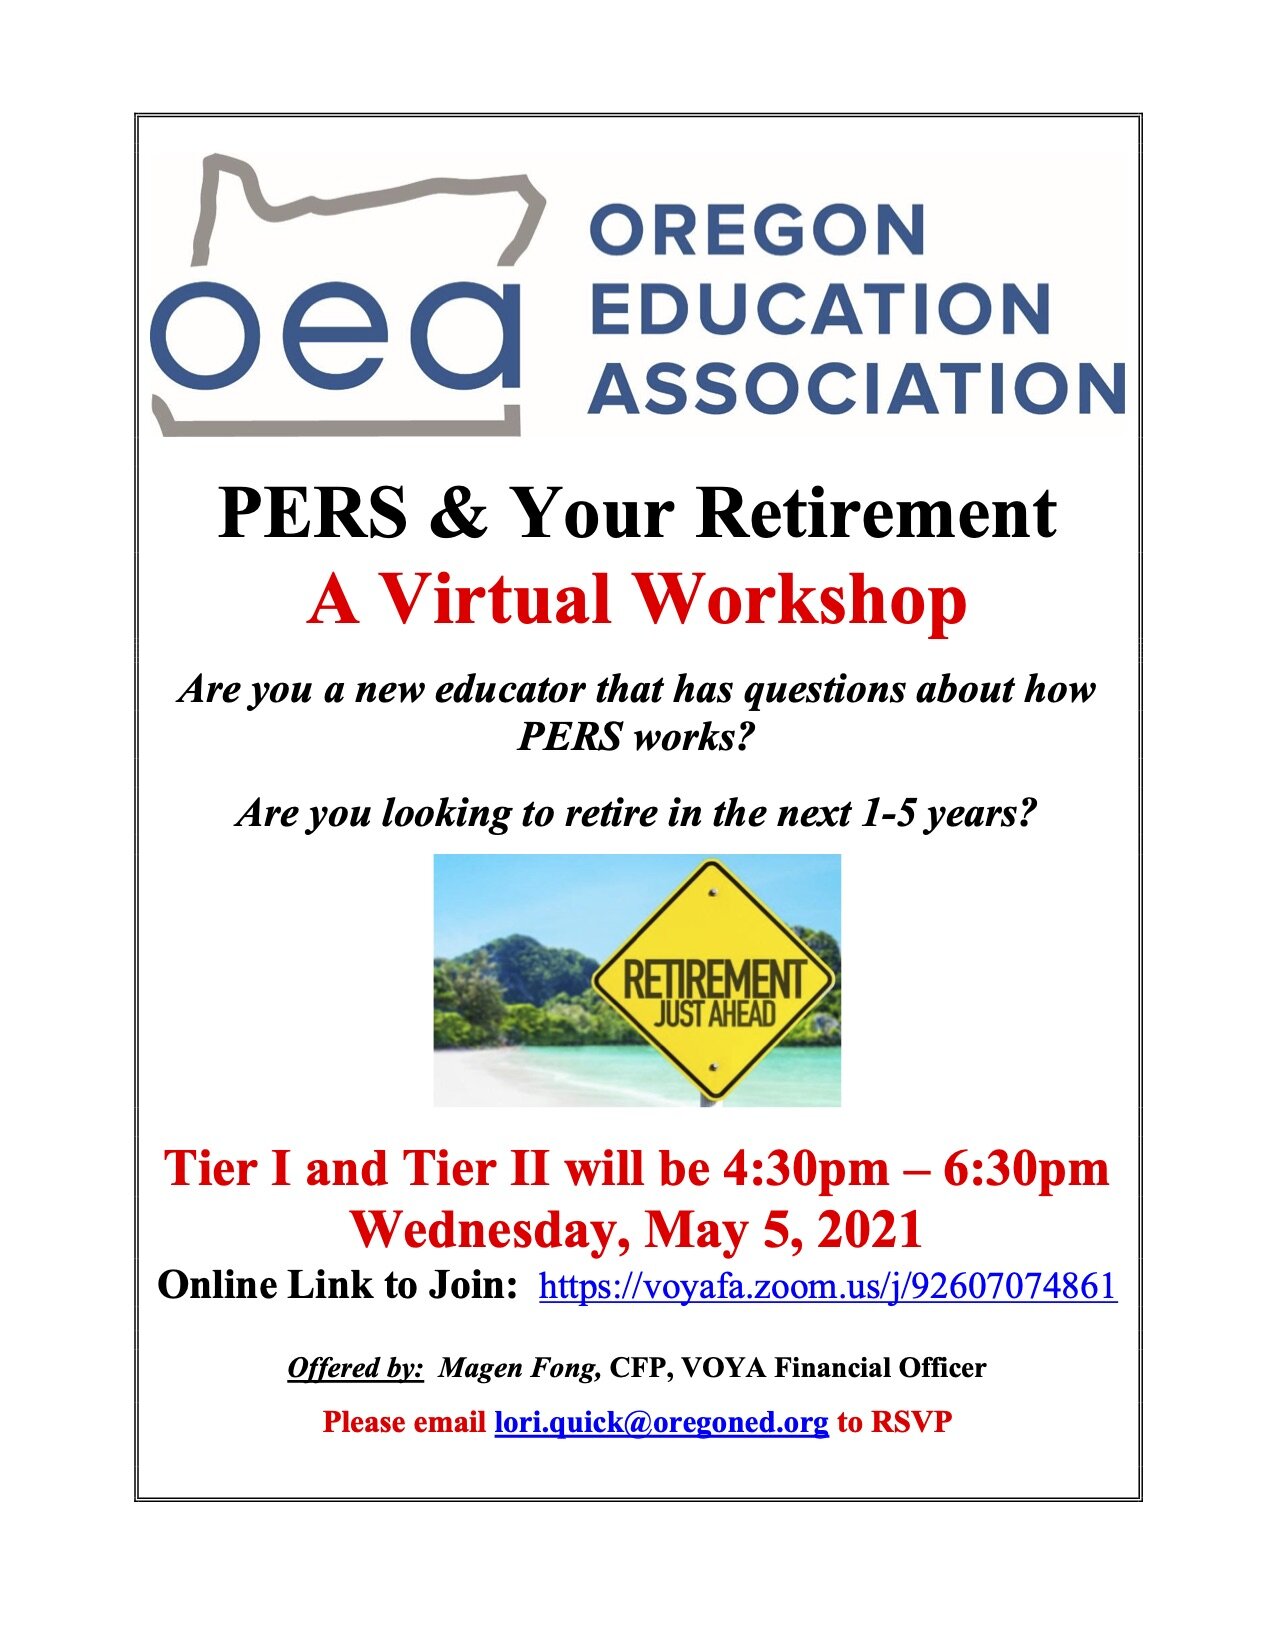 Flyer - PERS & Your Retirement - Tier I and II - 05-05-2021.jpg